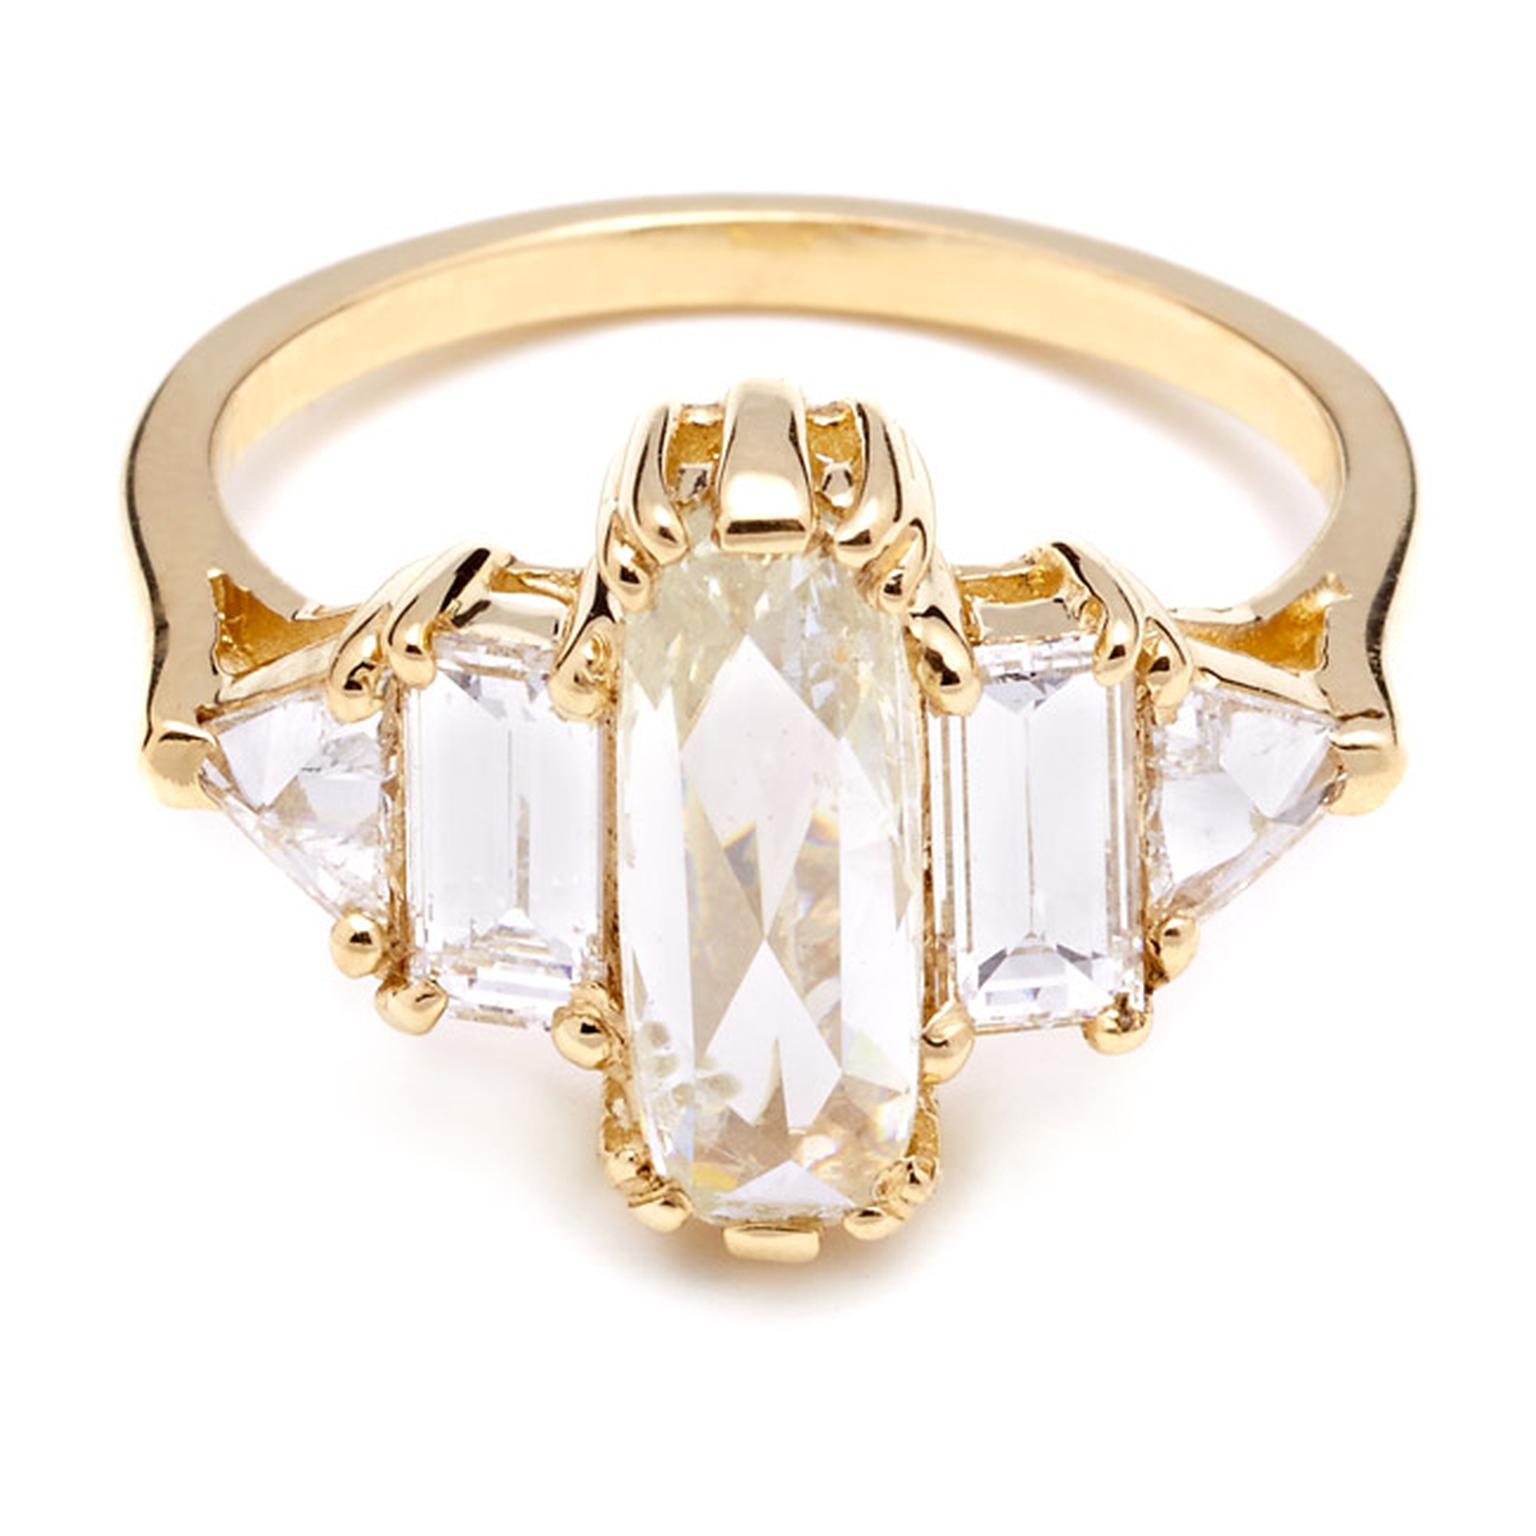 Anna Sheffield Theda ring, with a central elongated rose-cut pale yellow diamond flanked by four white diamonds in yellow gold.